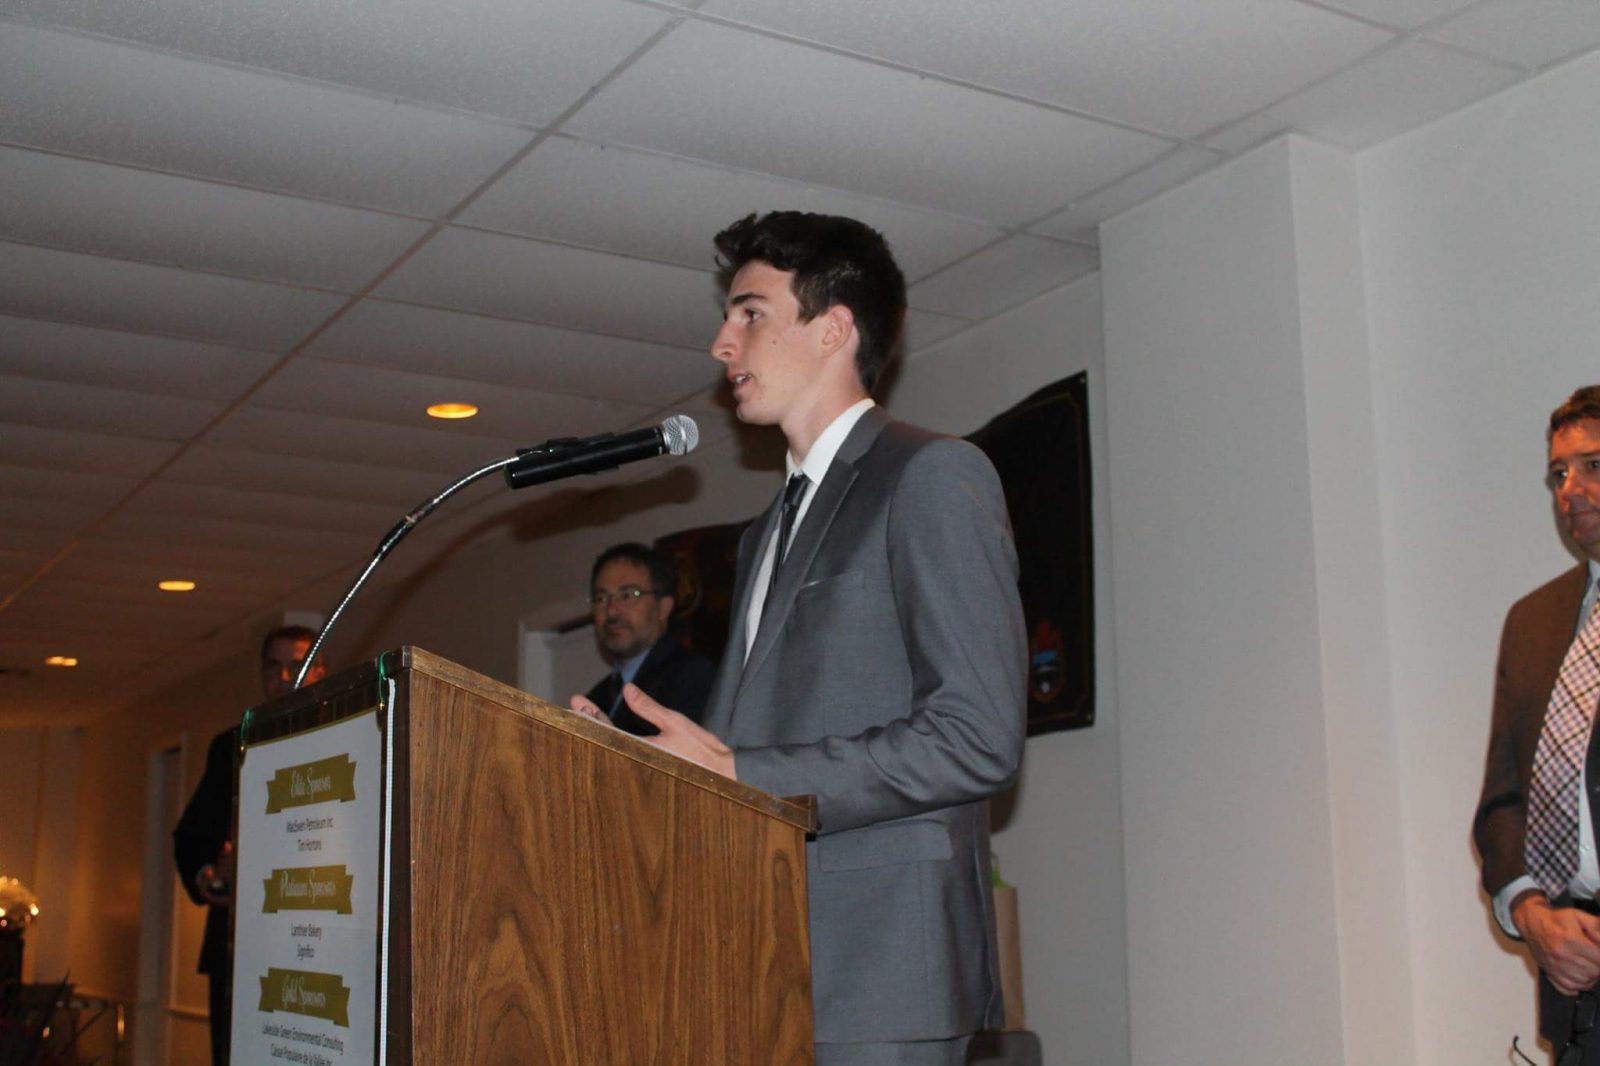 19-year-old student running for UCDSB Trustee